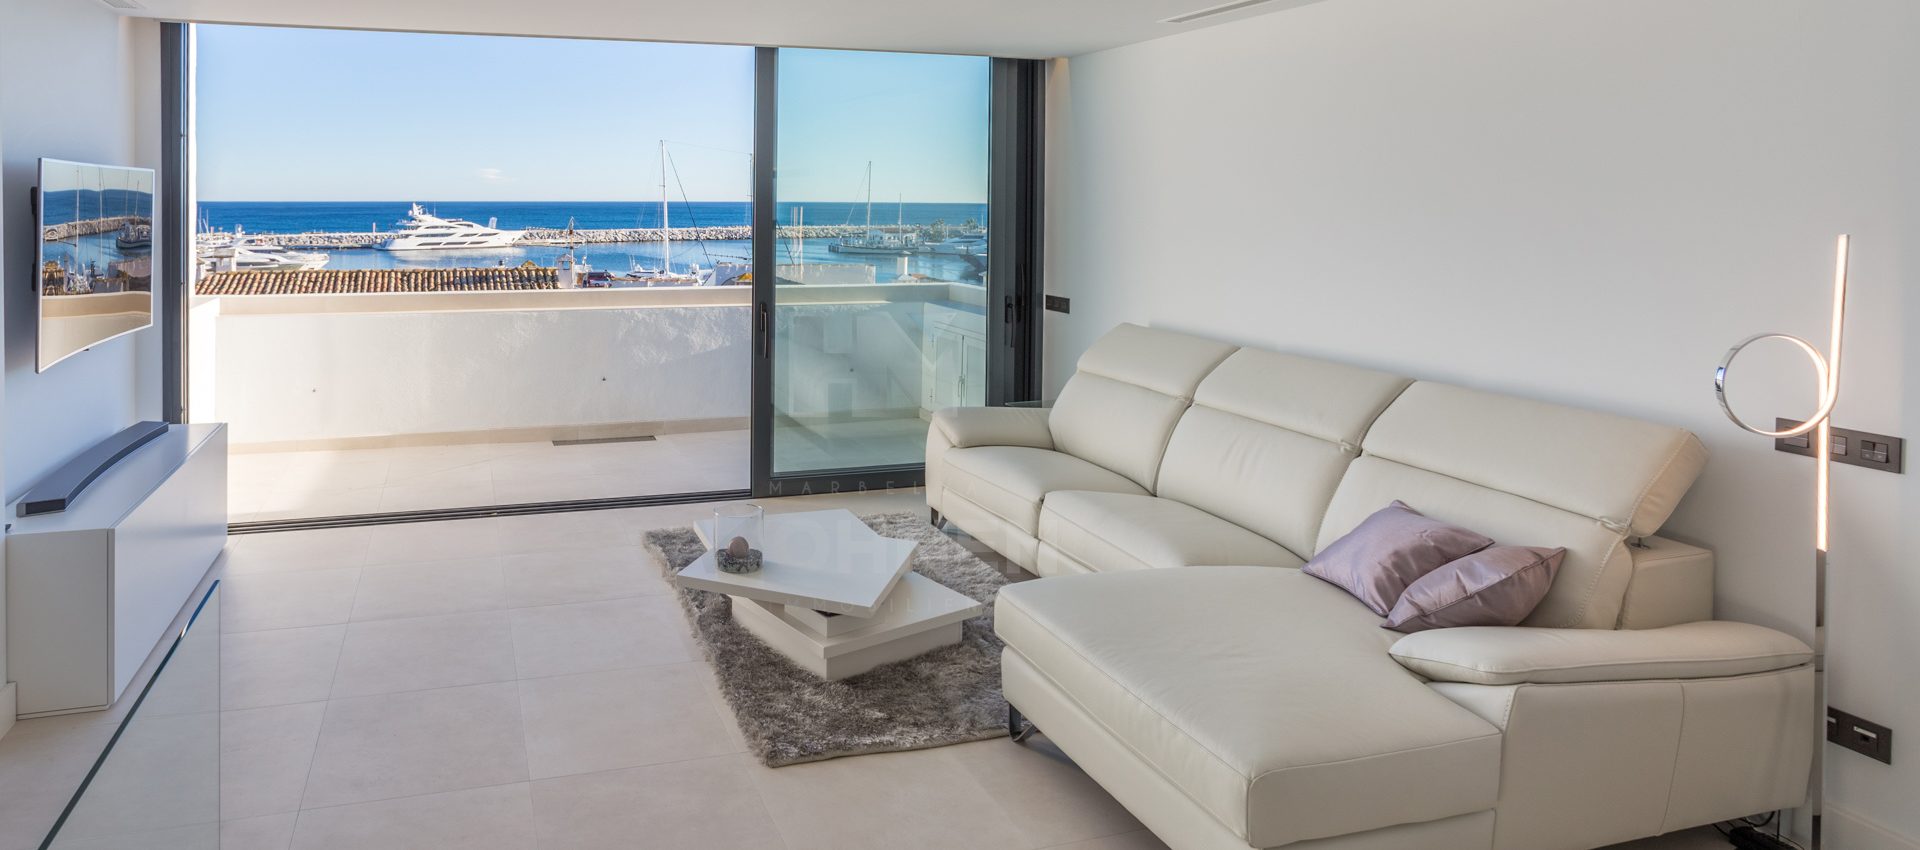 Contemporary duplex penthouse in the heart of Puerto Banus with fantastic panoramic views